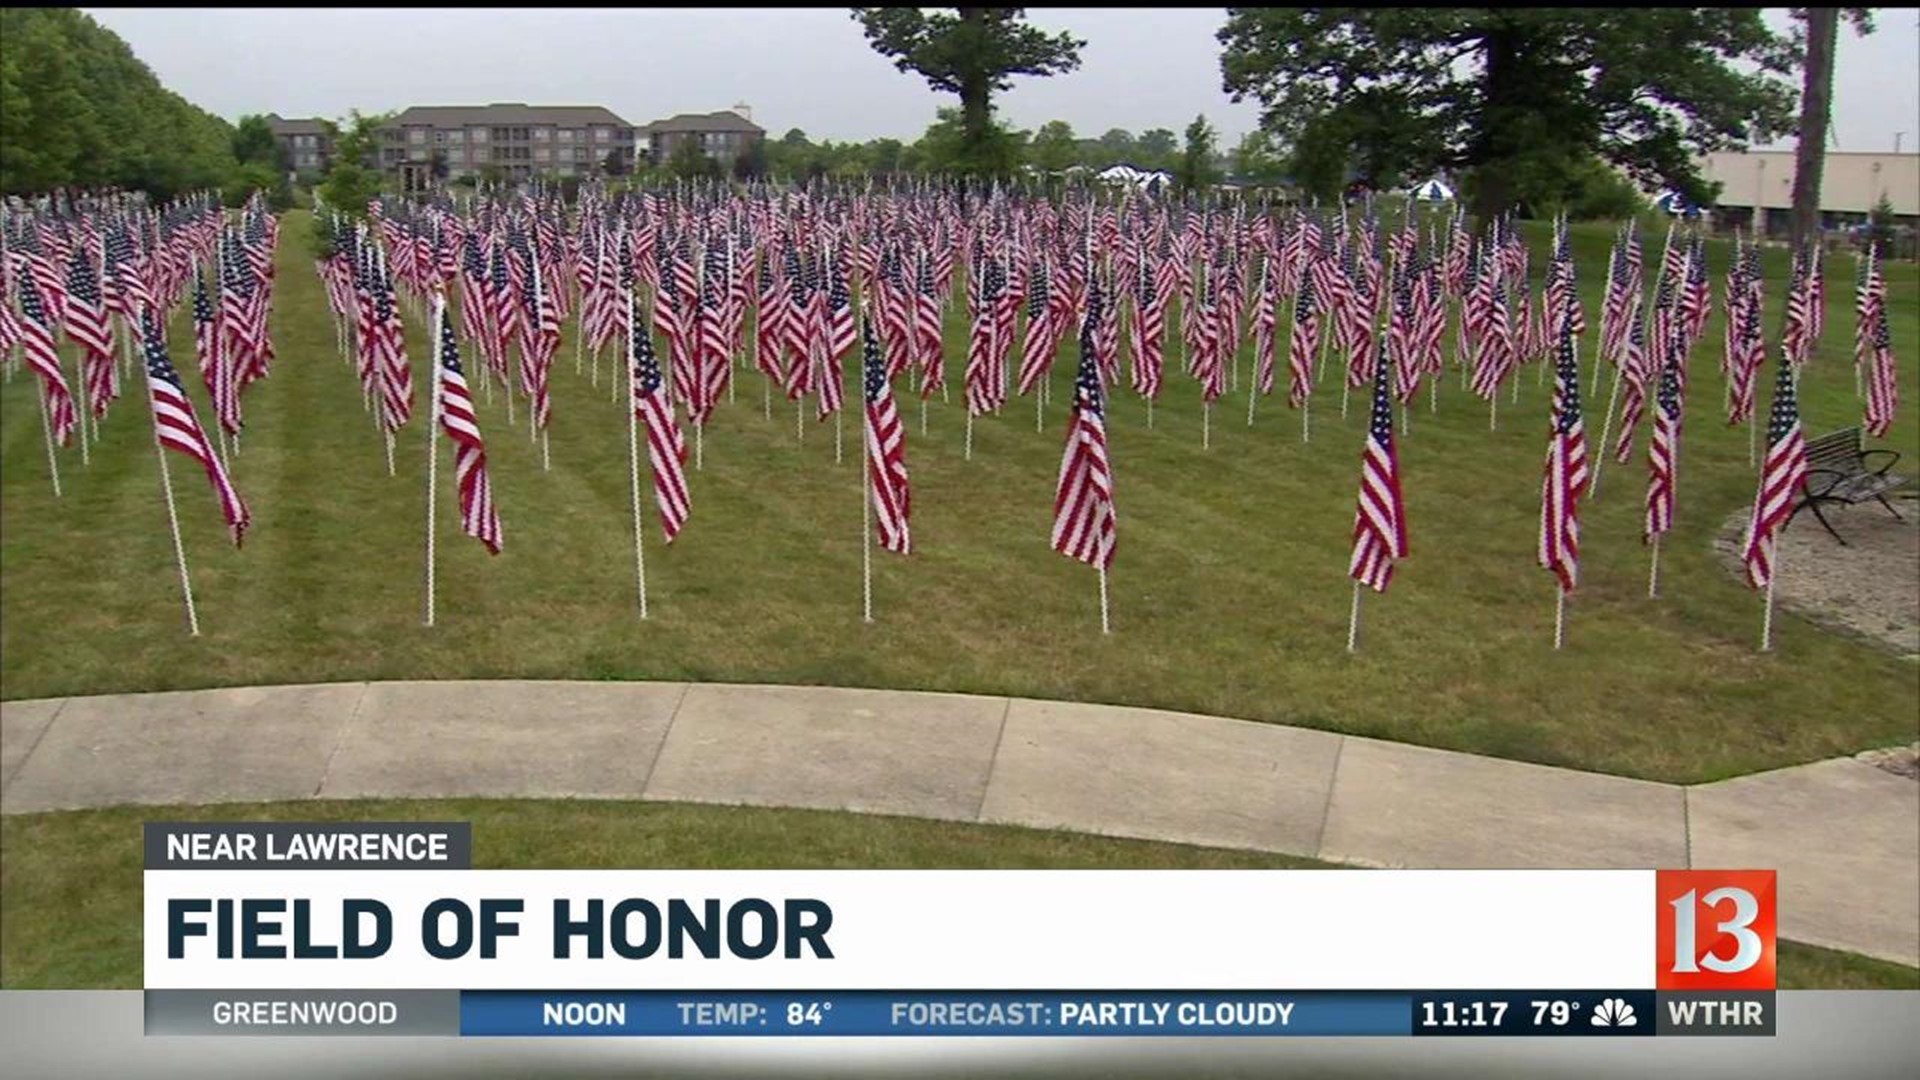 Field of Honor displays hundreds of flags for service members, first